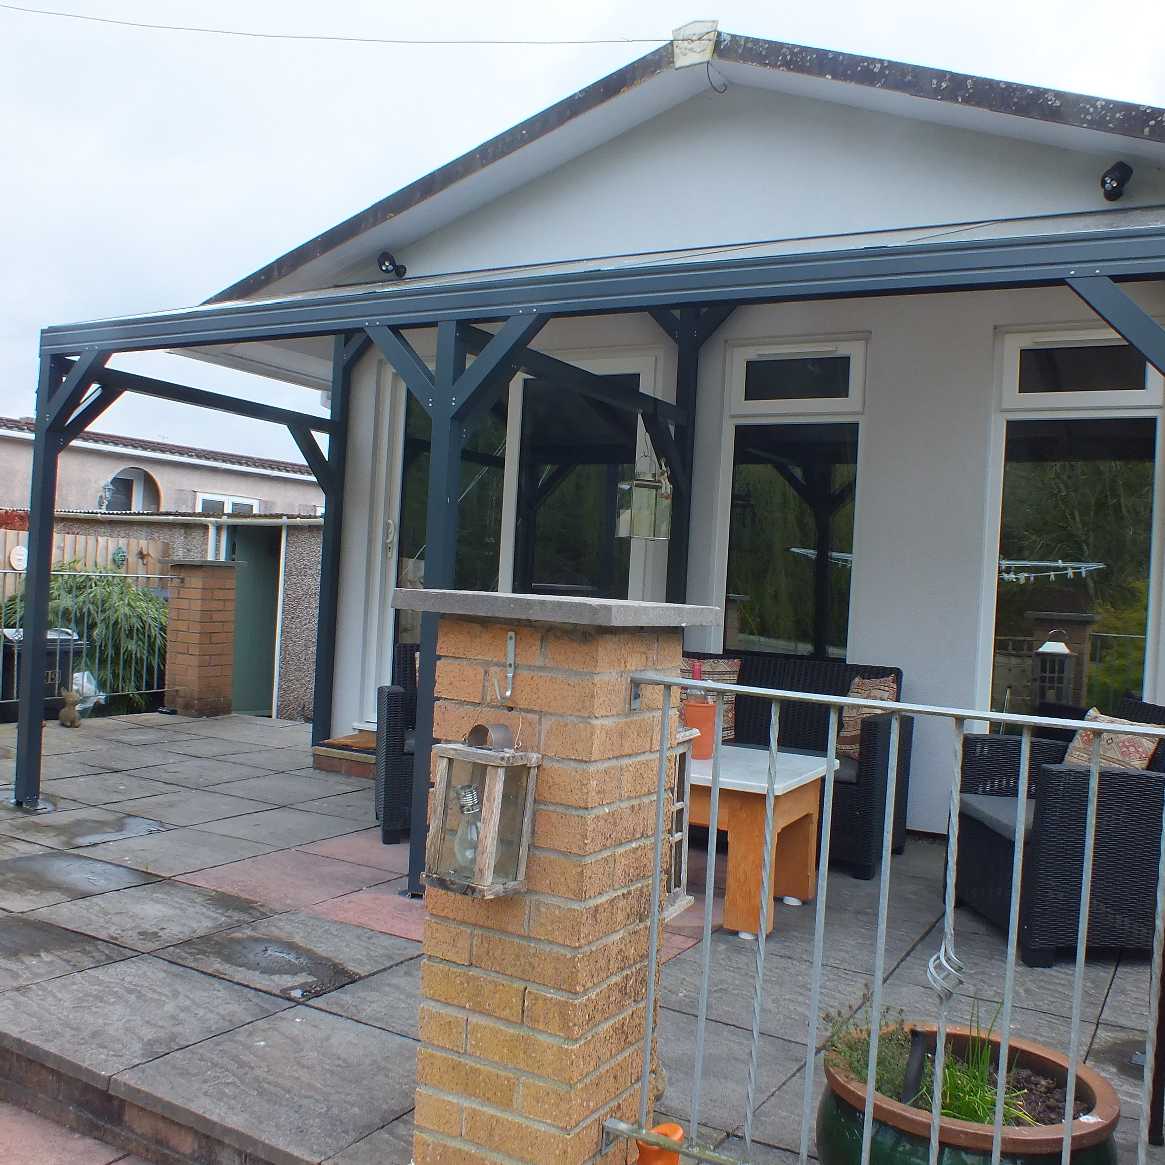 Buy Omega Smart Free-Standing, Anthracite Grey MonoPitch Roof Canopy with 16mm Polycarbonate Glazing - 3.1m (W) x 2.0m (P), (4) Supporting Posts online today